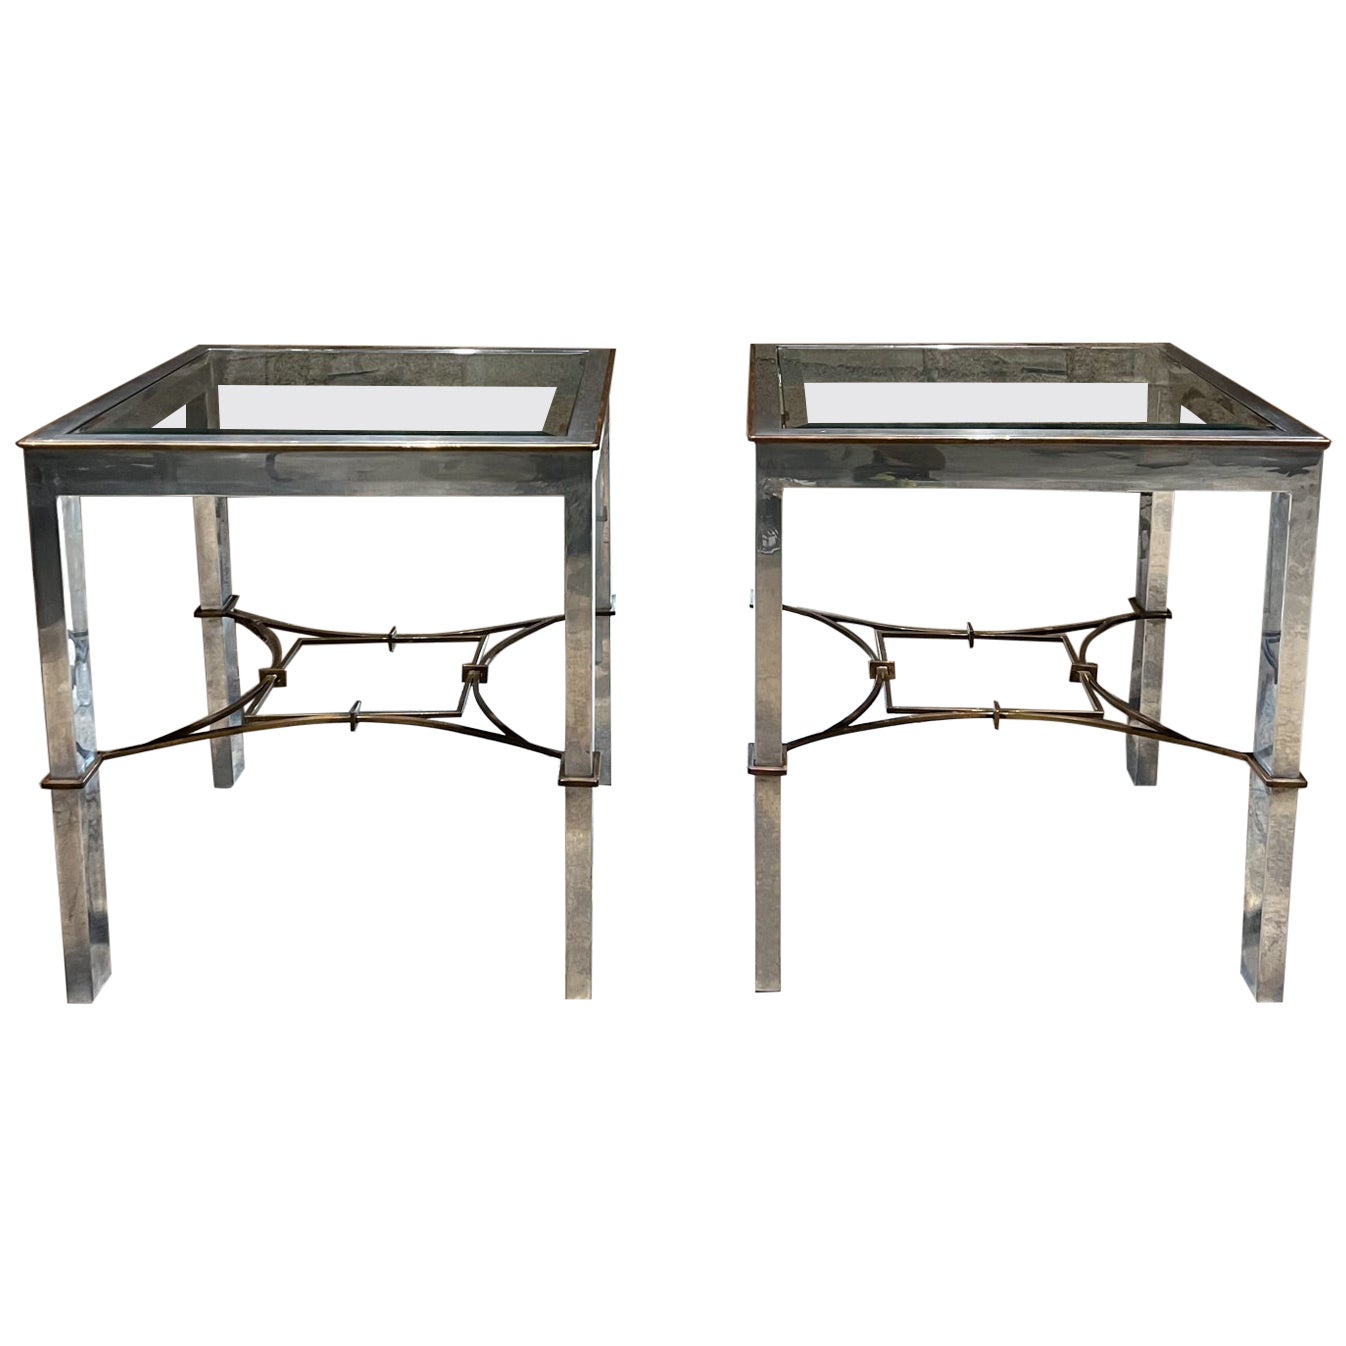 1960s Arturo Pani Modern Side Tables Aluminum and Bronze Mexico City For Sale